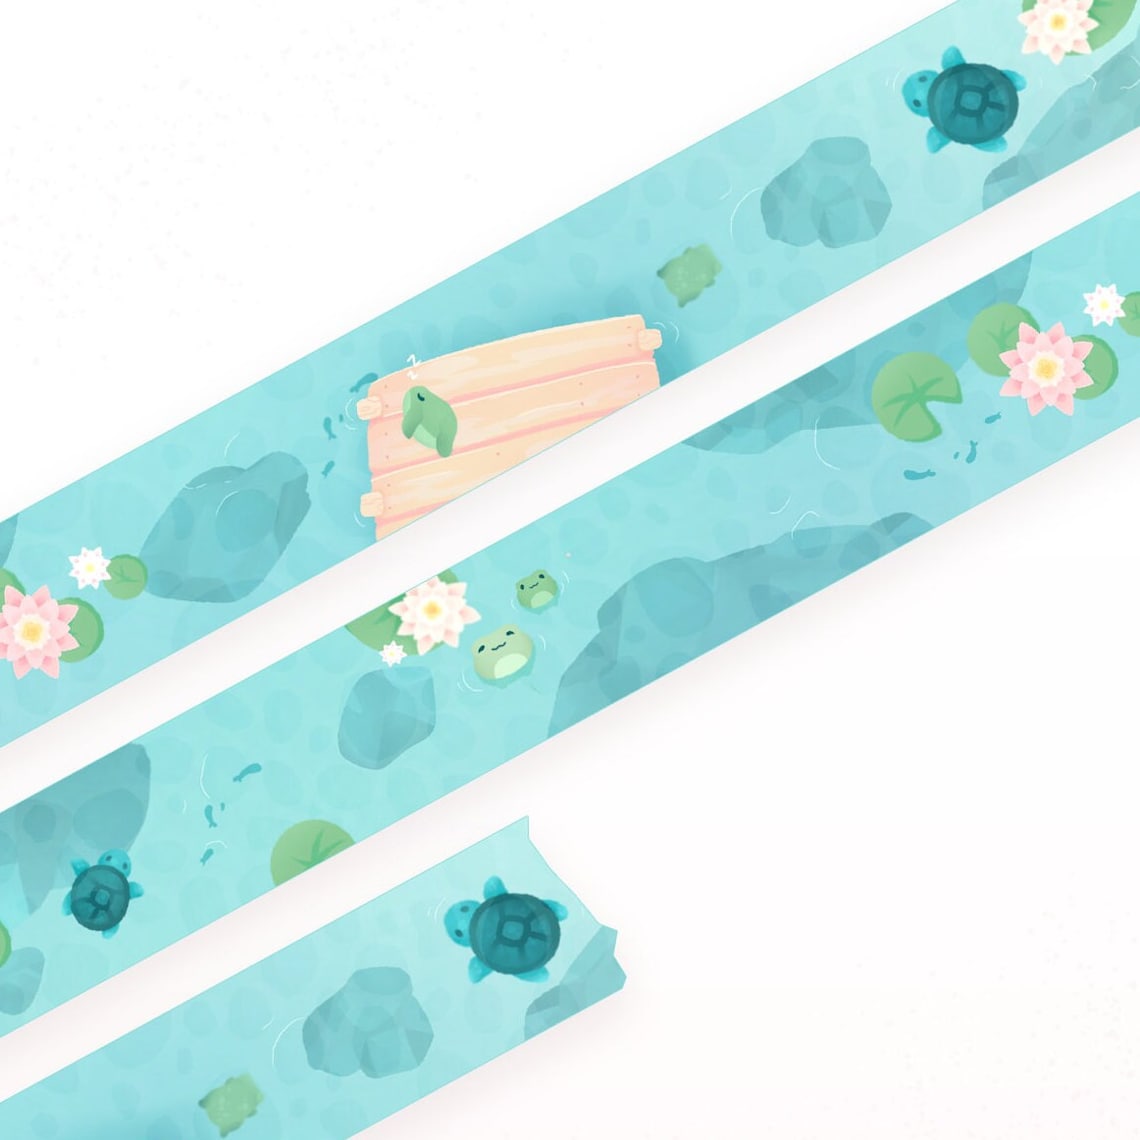 Frog & Turtle | A Day At The Lake | 10m x 15mm Roll | Artist Masking Tape | Decorative Planner Tape | Kawaii Calendar Journal Stationery